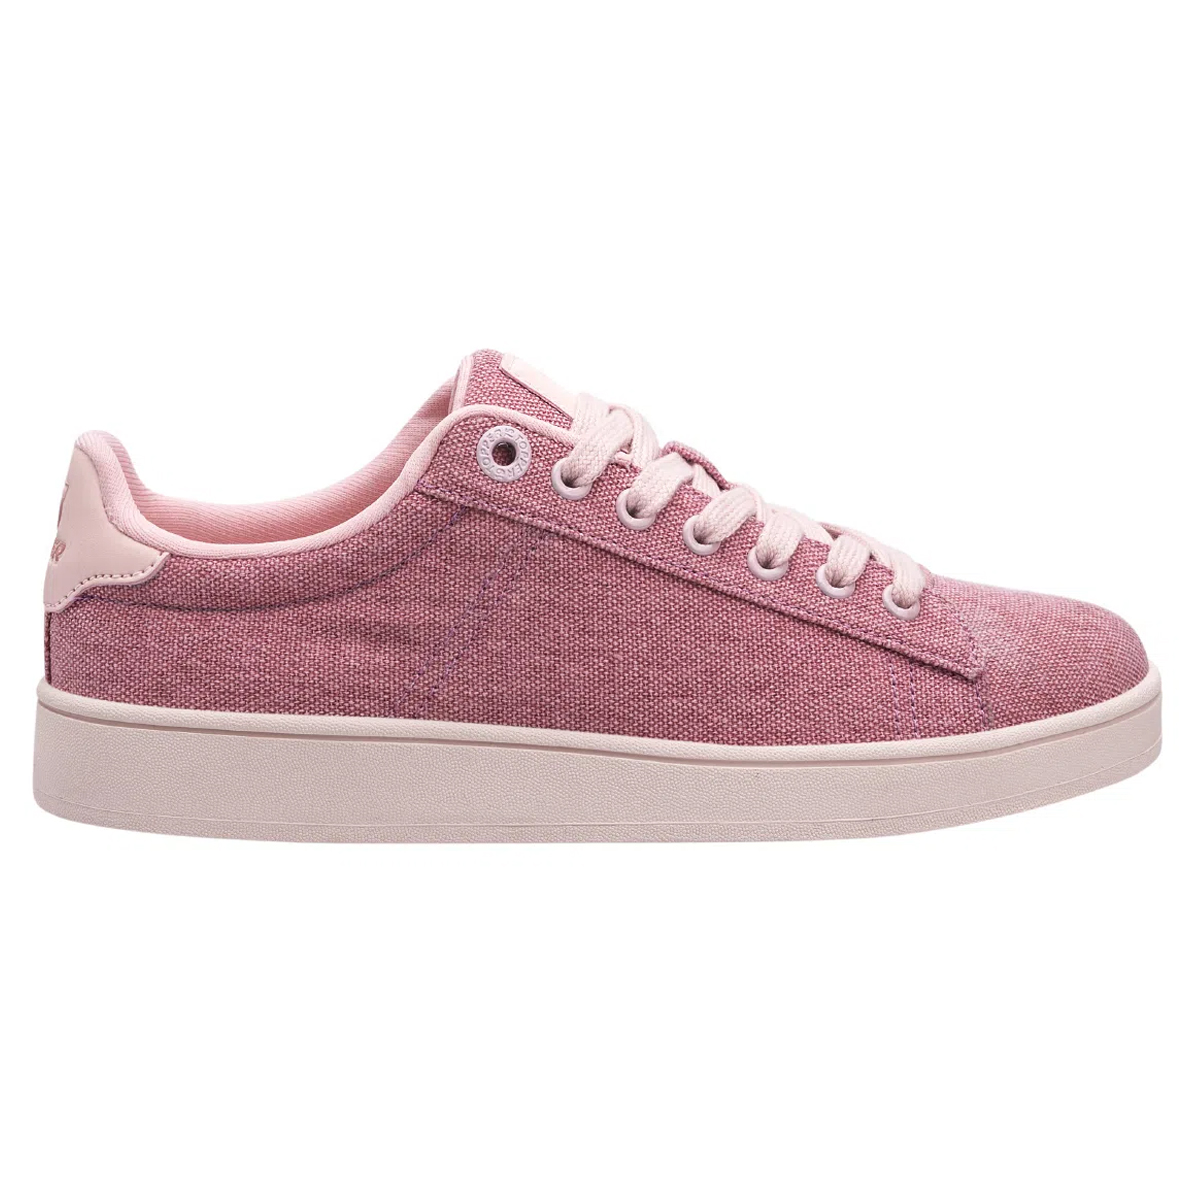 Zapatillas Topper Candy Wash,  image number null